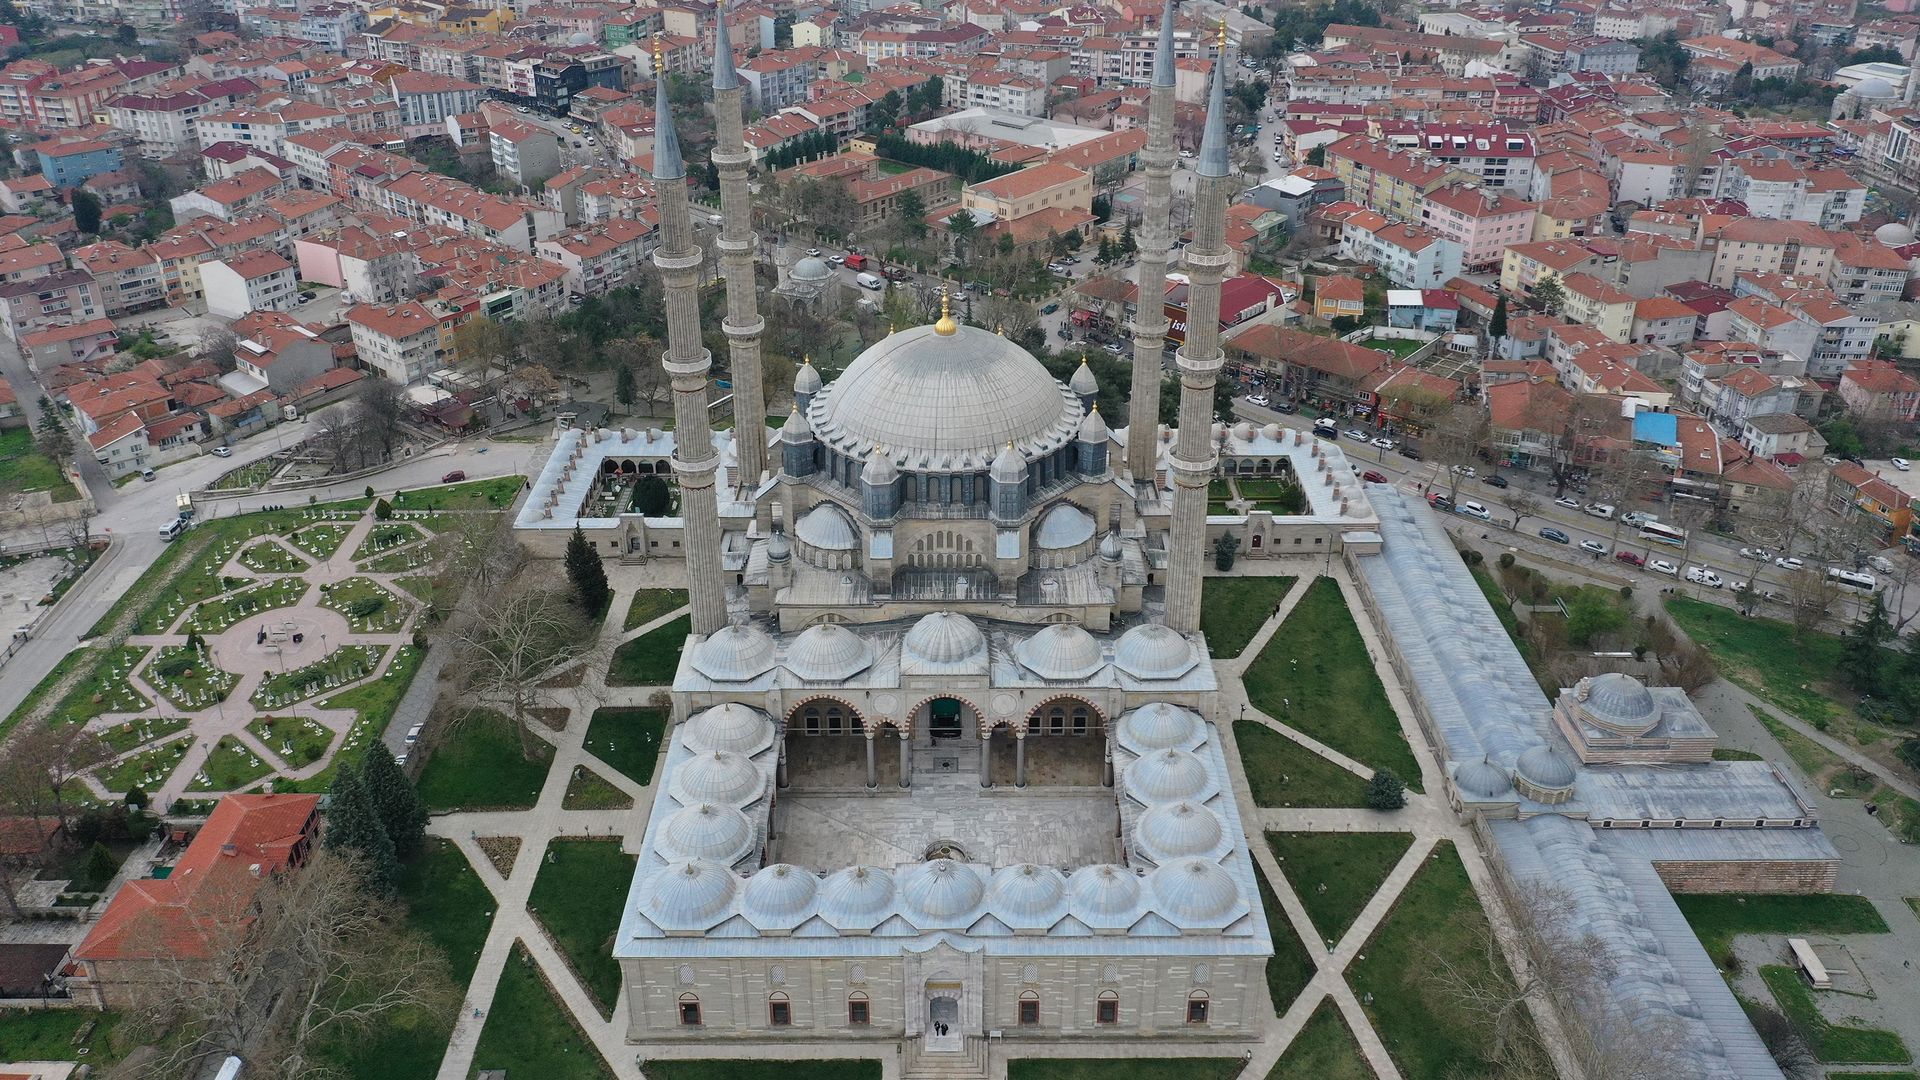 Selimiye Mosque, the masterpiece of Sinan the architect